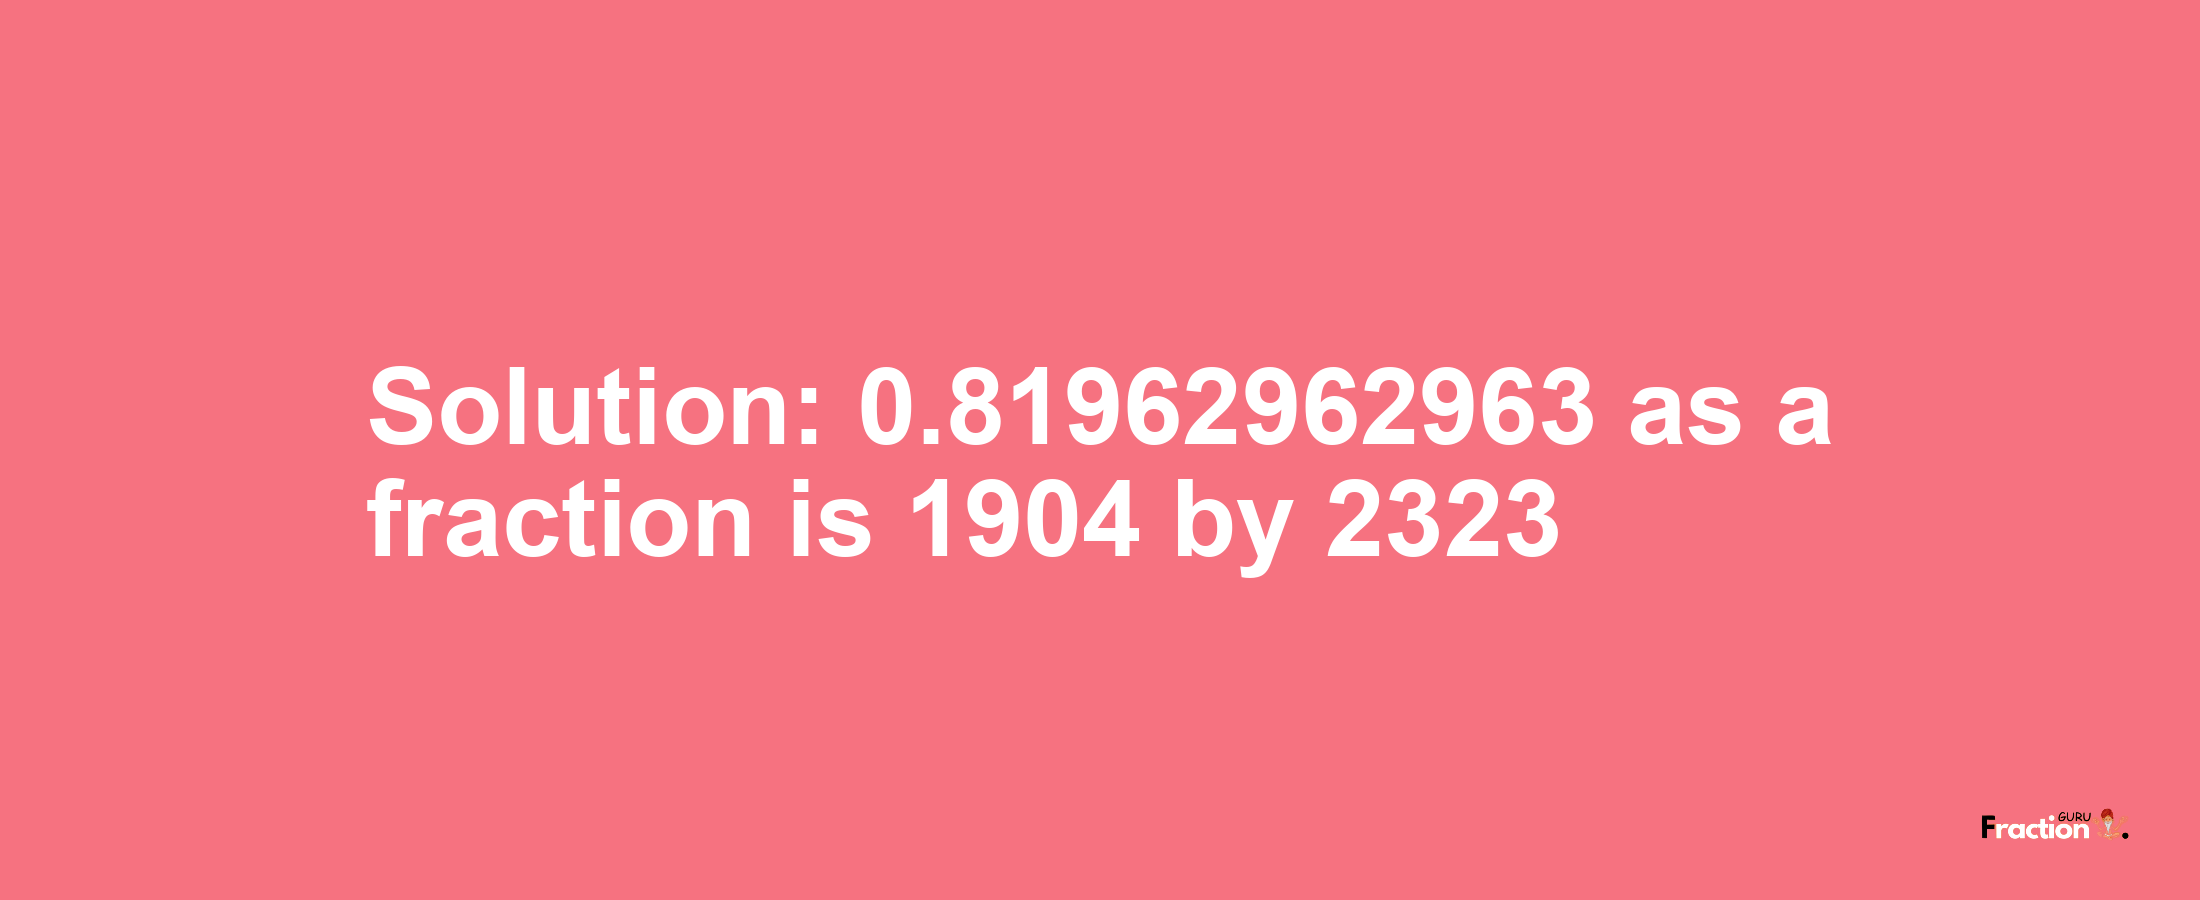 Solution:0.81962962963 as a fraction is 1904/2323